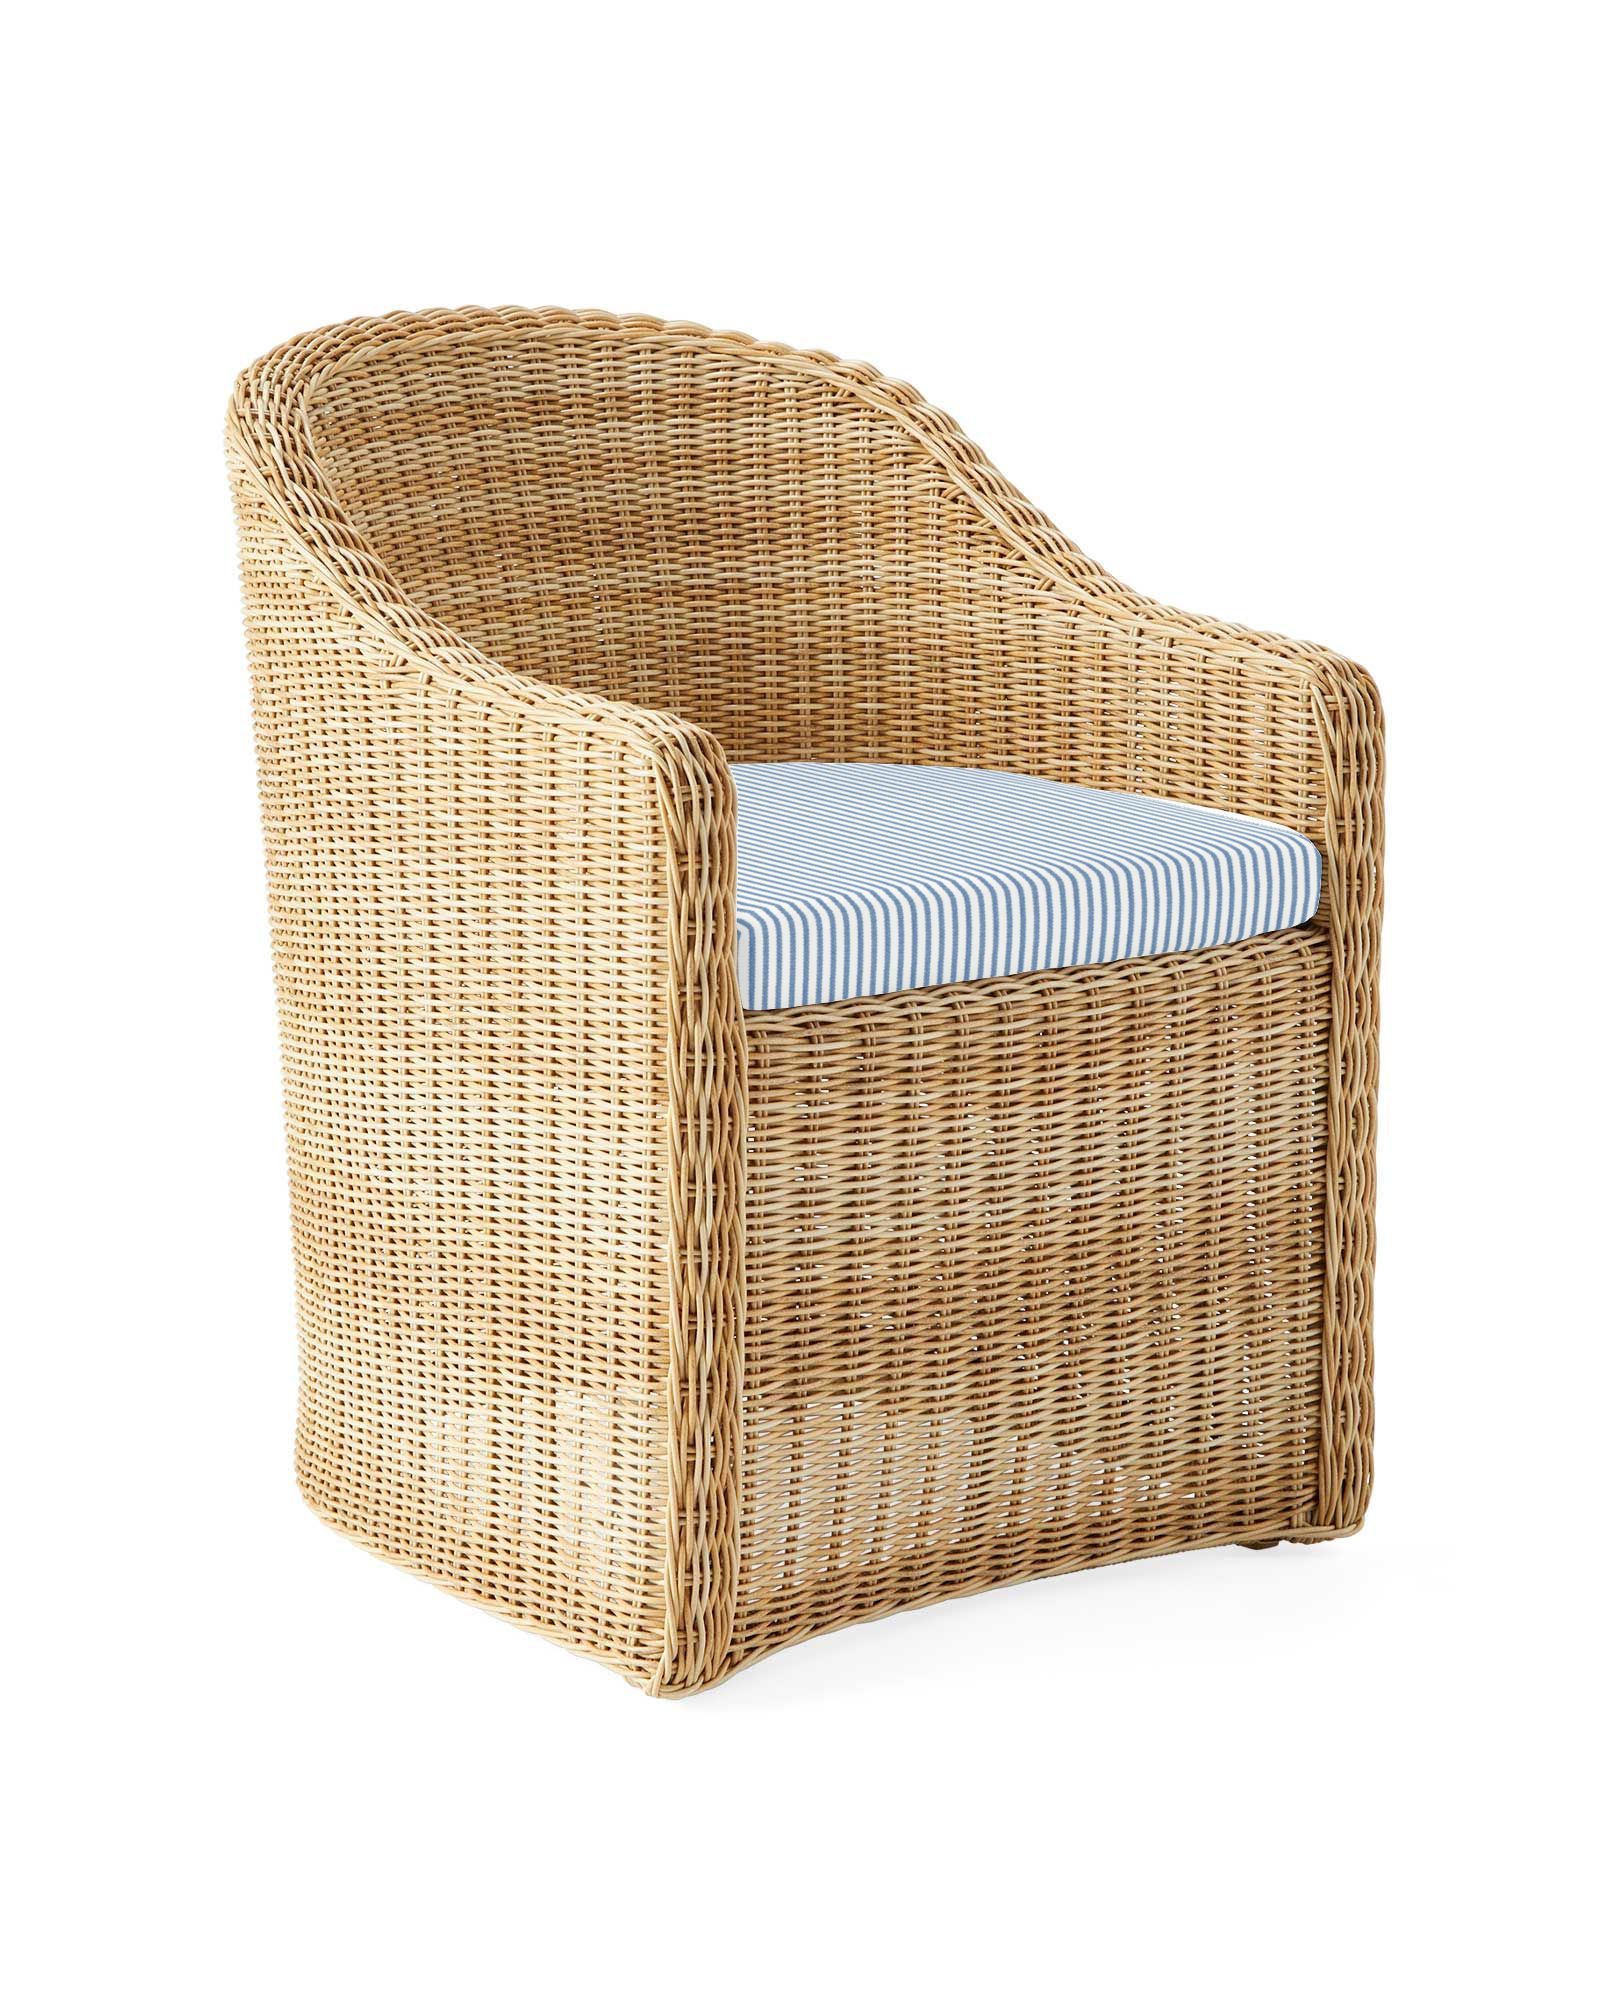 Tofino Dining Chair | Serena and Lily